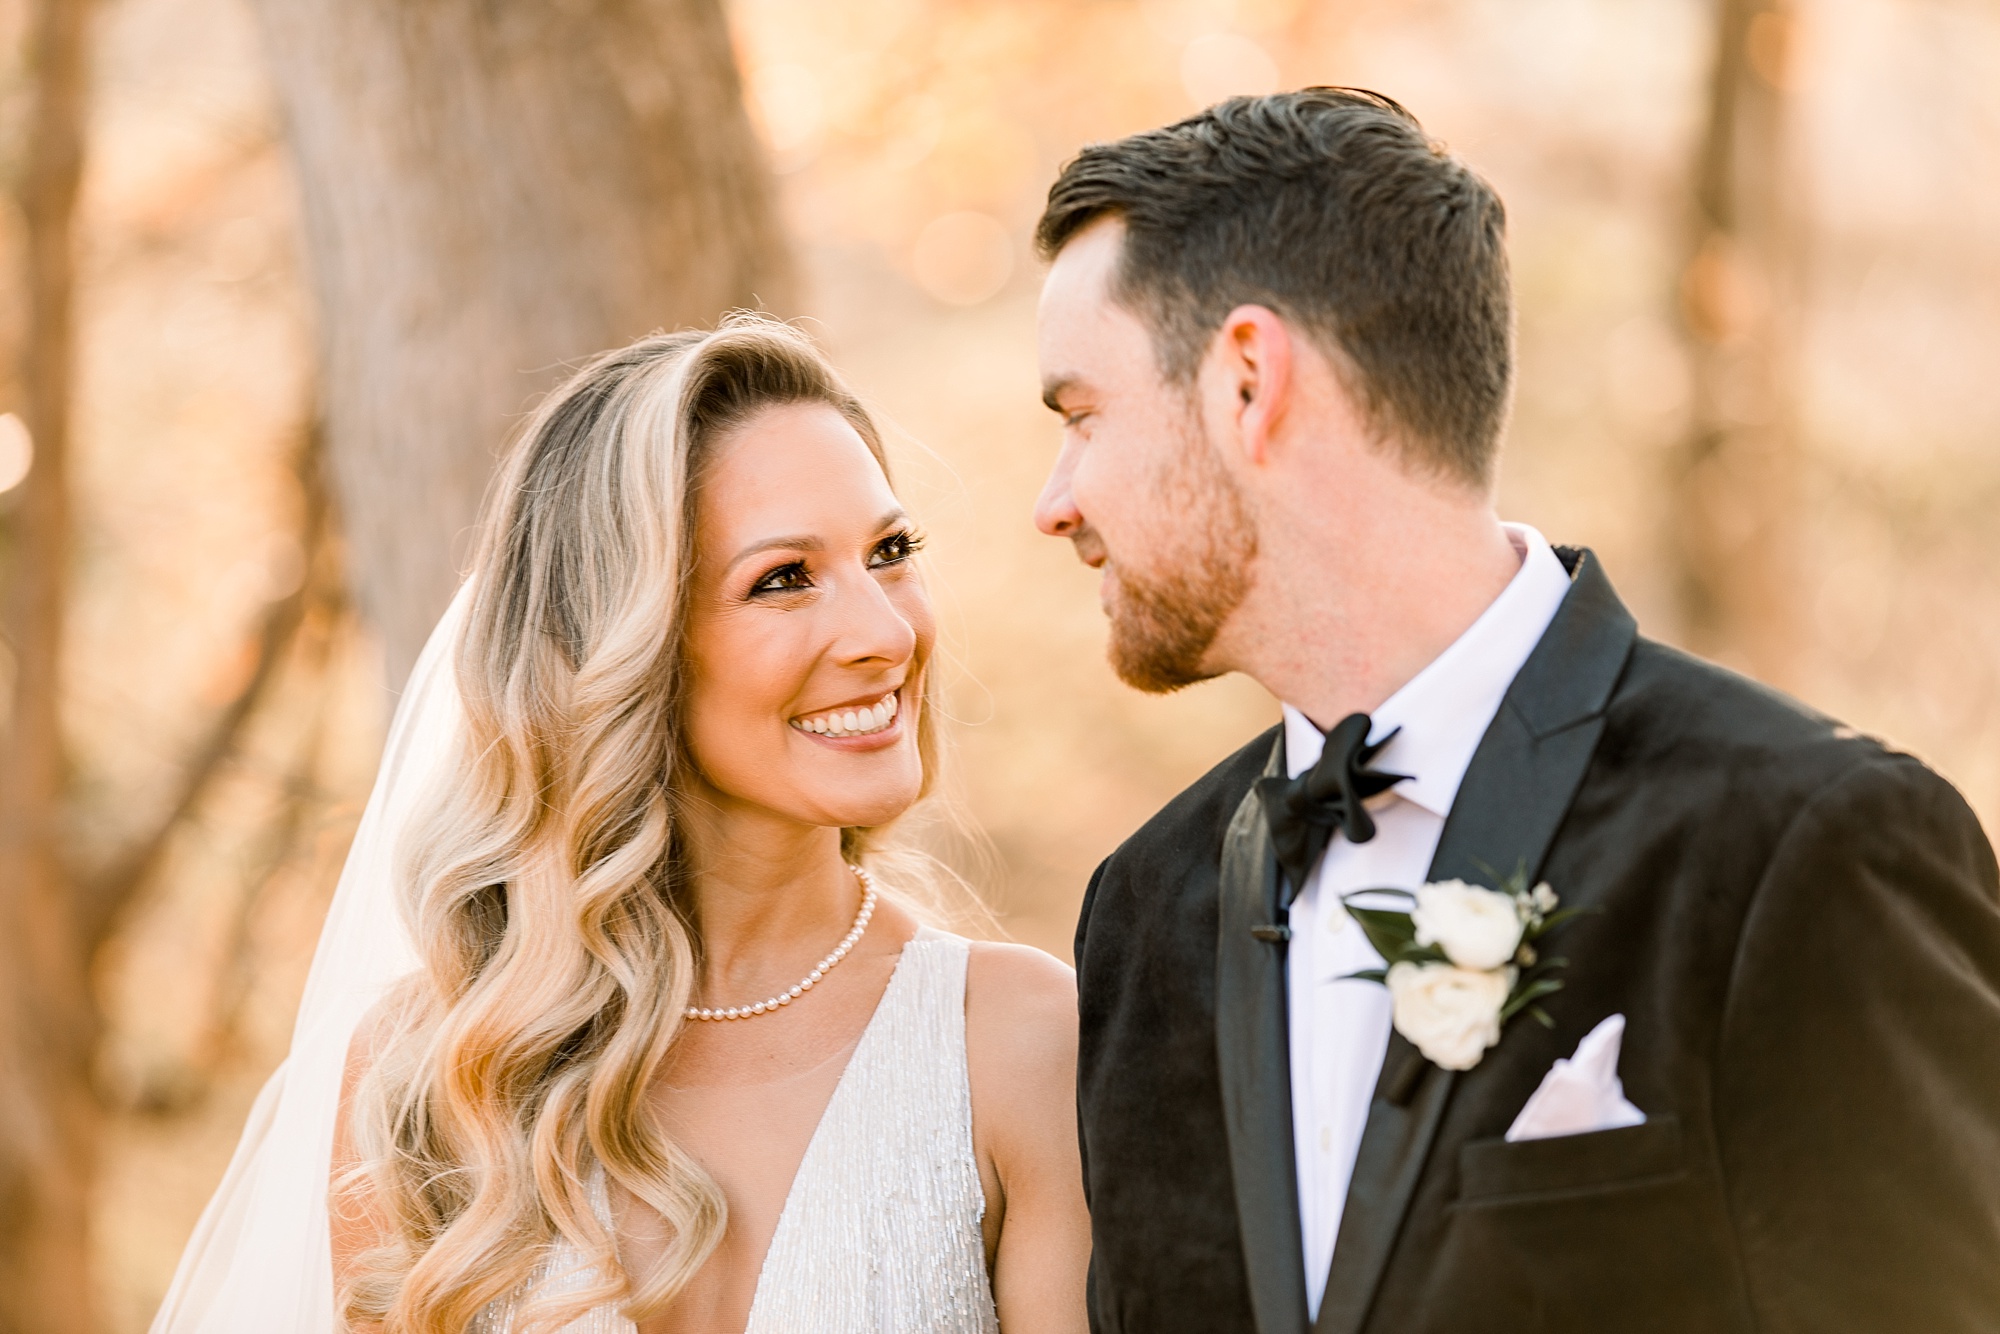 bride and groom smile together during sunset wedding photos at Tyler Gardens